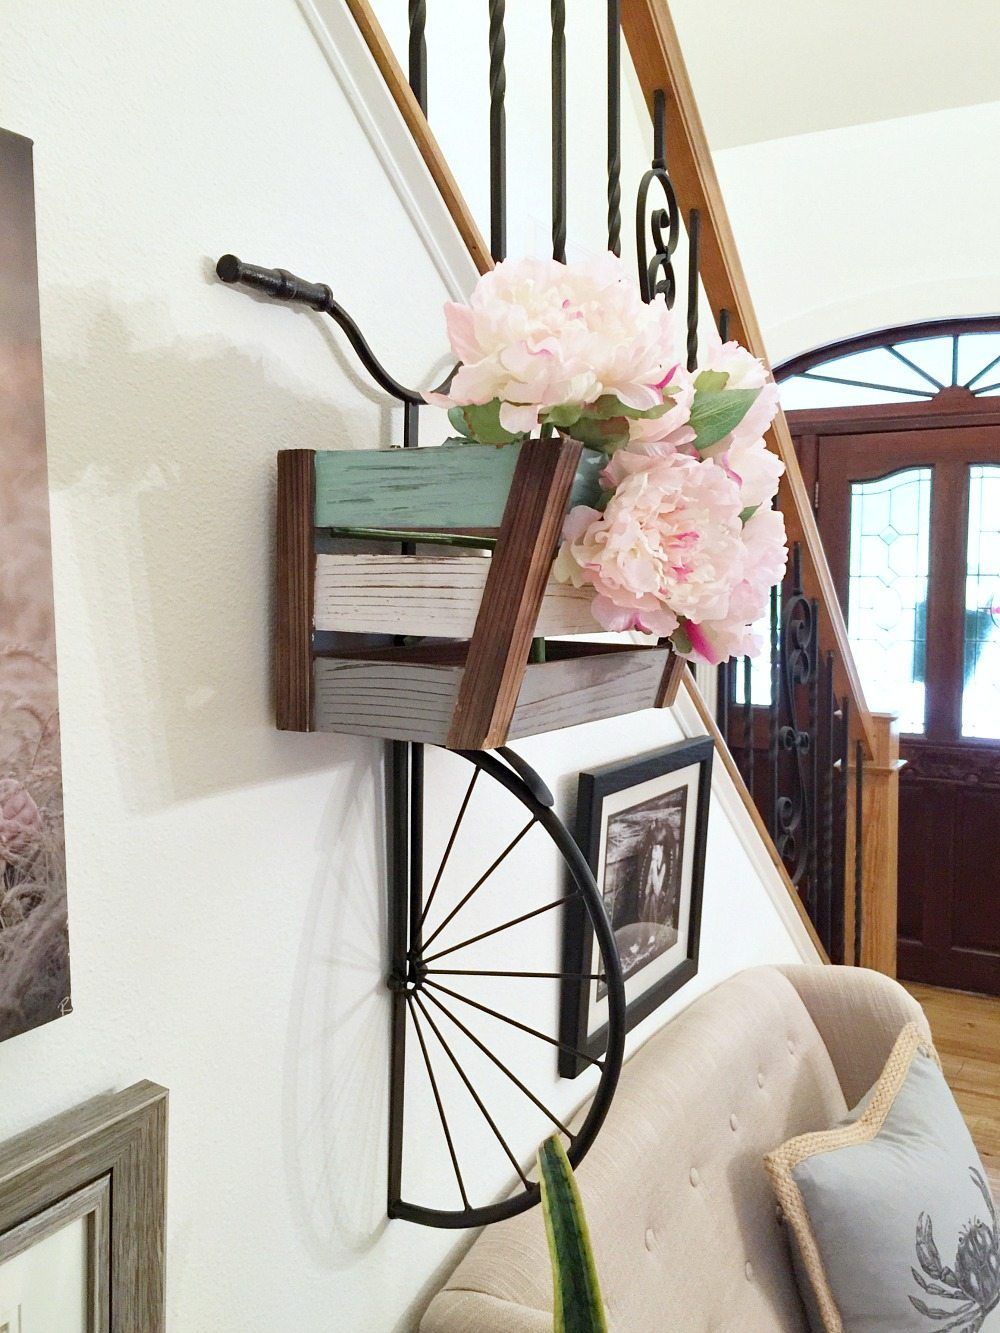 Cutest half bike for the wall with peonies